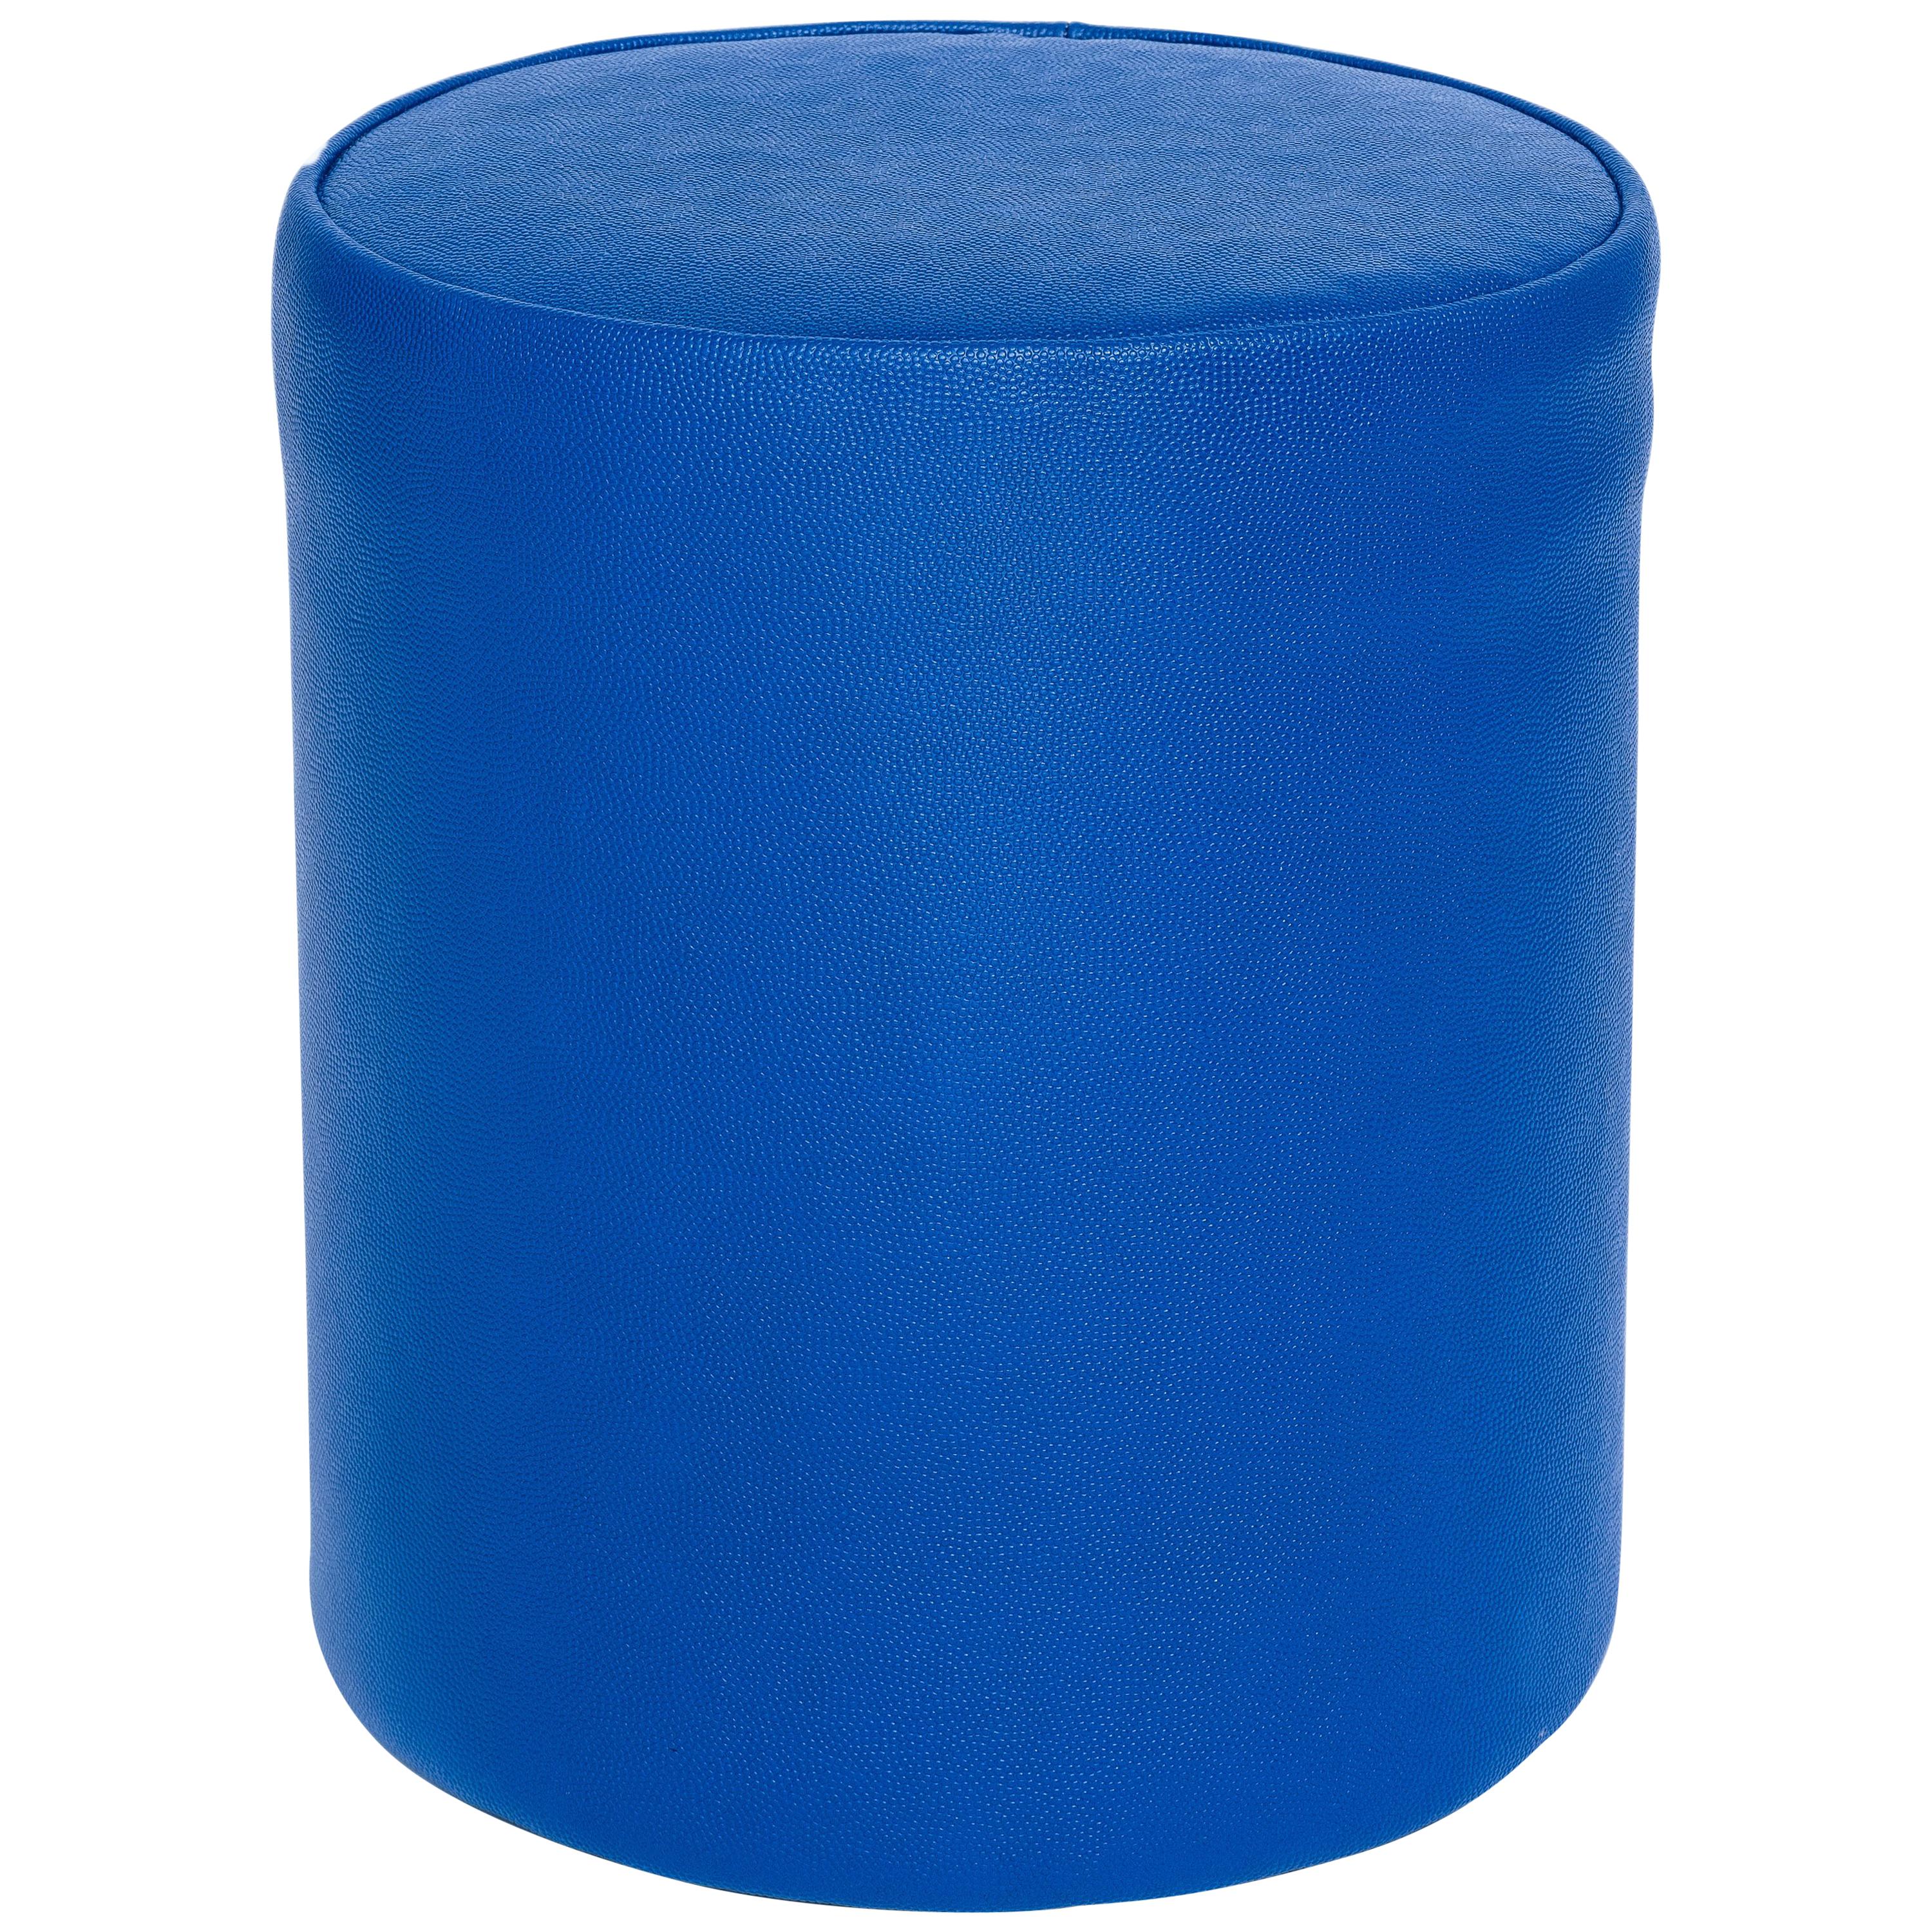 Blue Sport Pouf in Basketball Game-Ball Leather For Sale